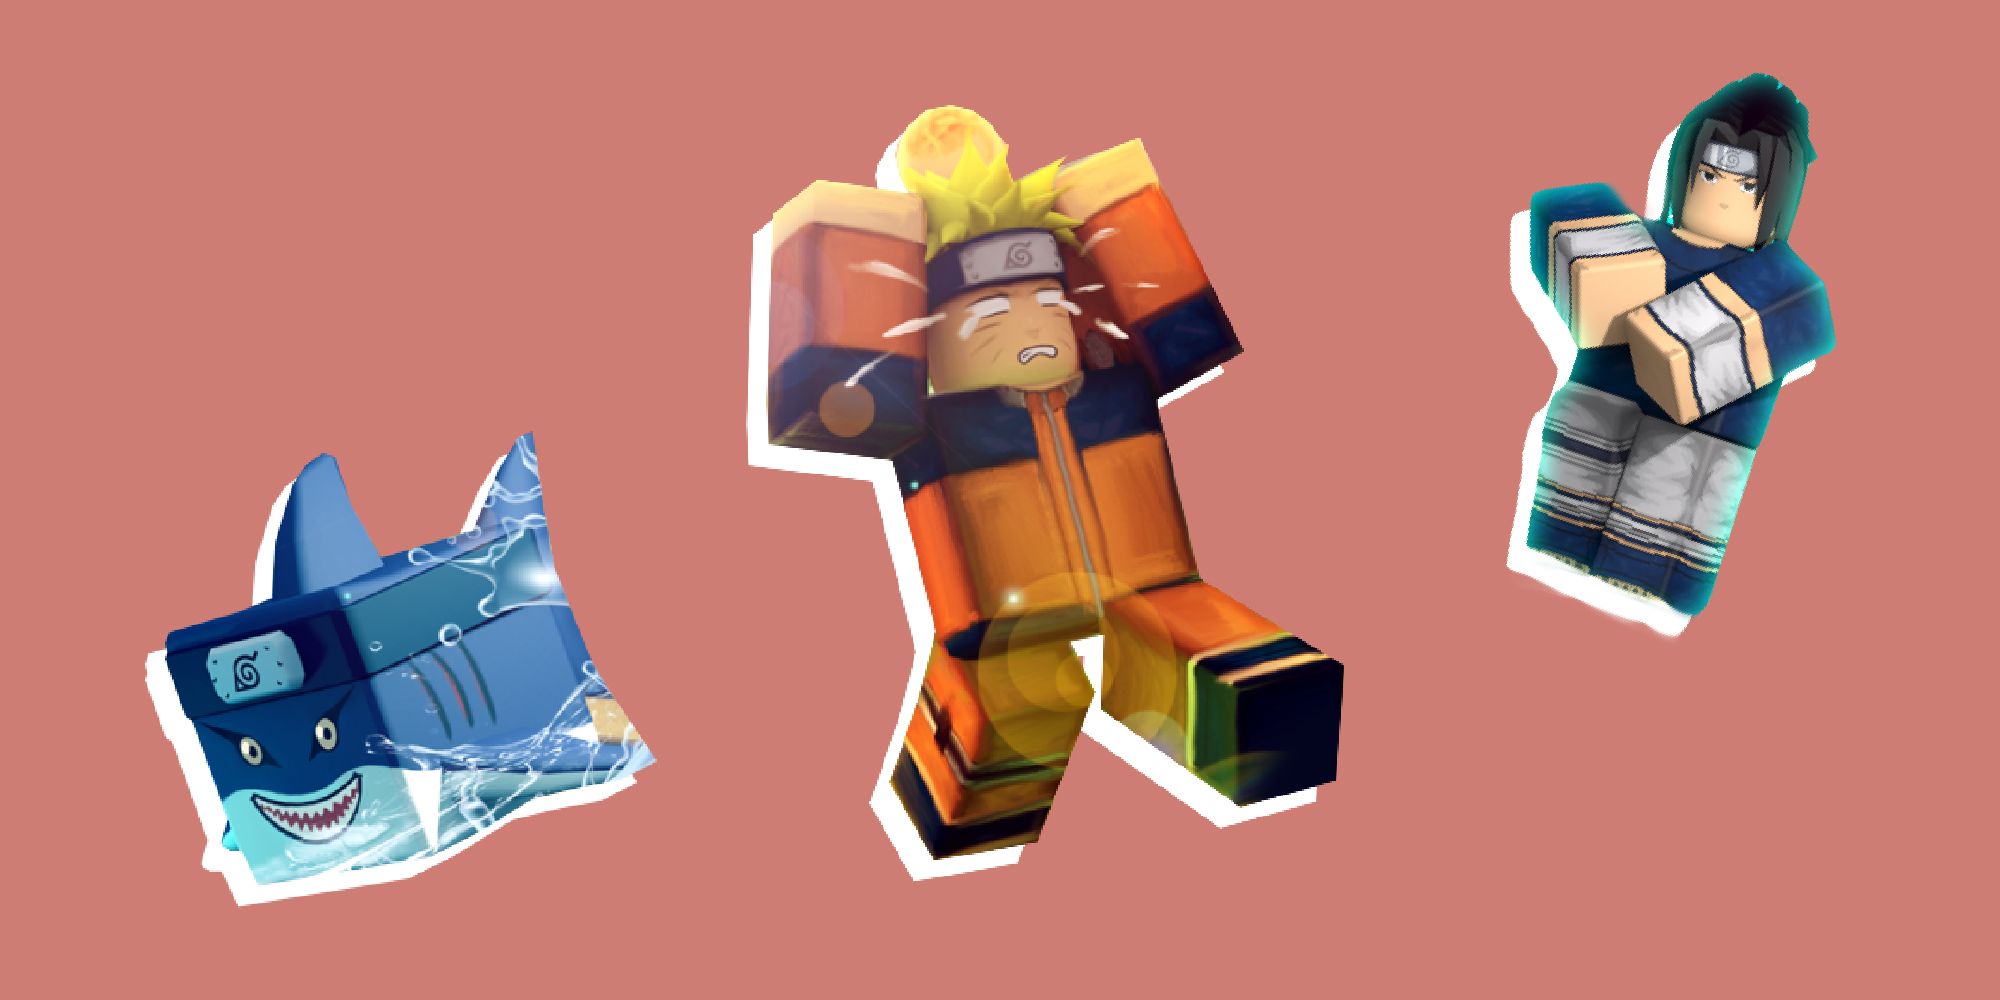 Roblox Strongman Simulator Codes for January 2023: Free boosts, pets, and  more